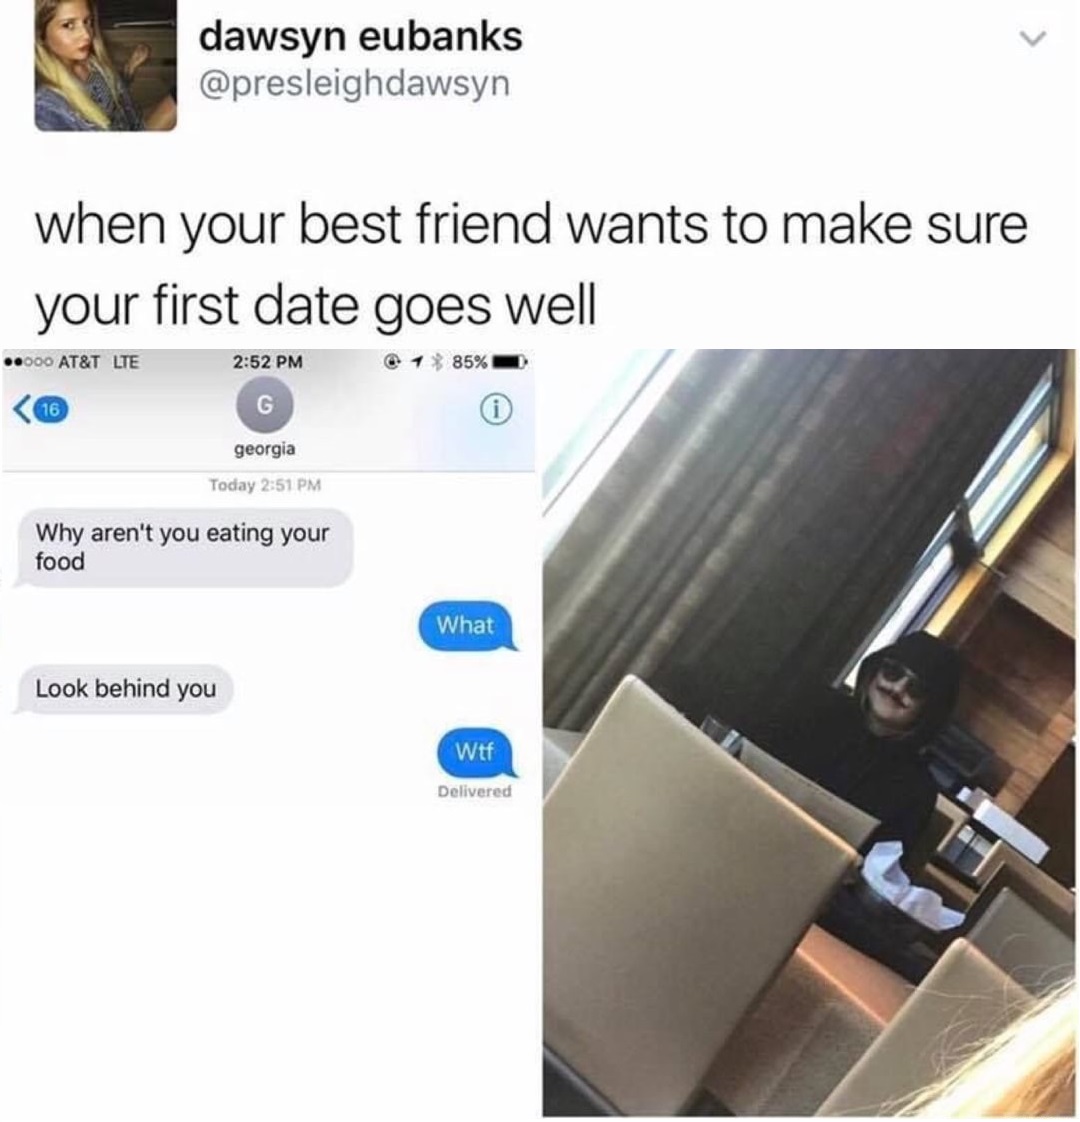 best friend spying on date - dawsyn eubanks when your best friend wants to make sure your first date goes well .000 At&T Lte @ 1 85% G georgia Today Why aren't you eating your food What Look behind you Wtf Delivered